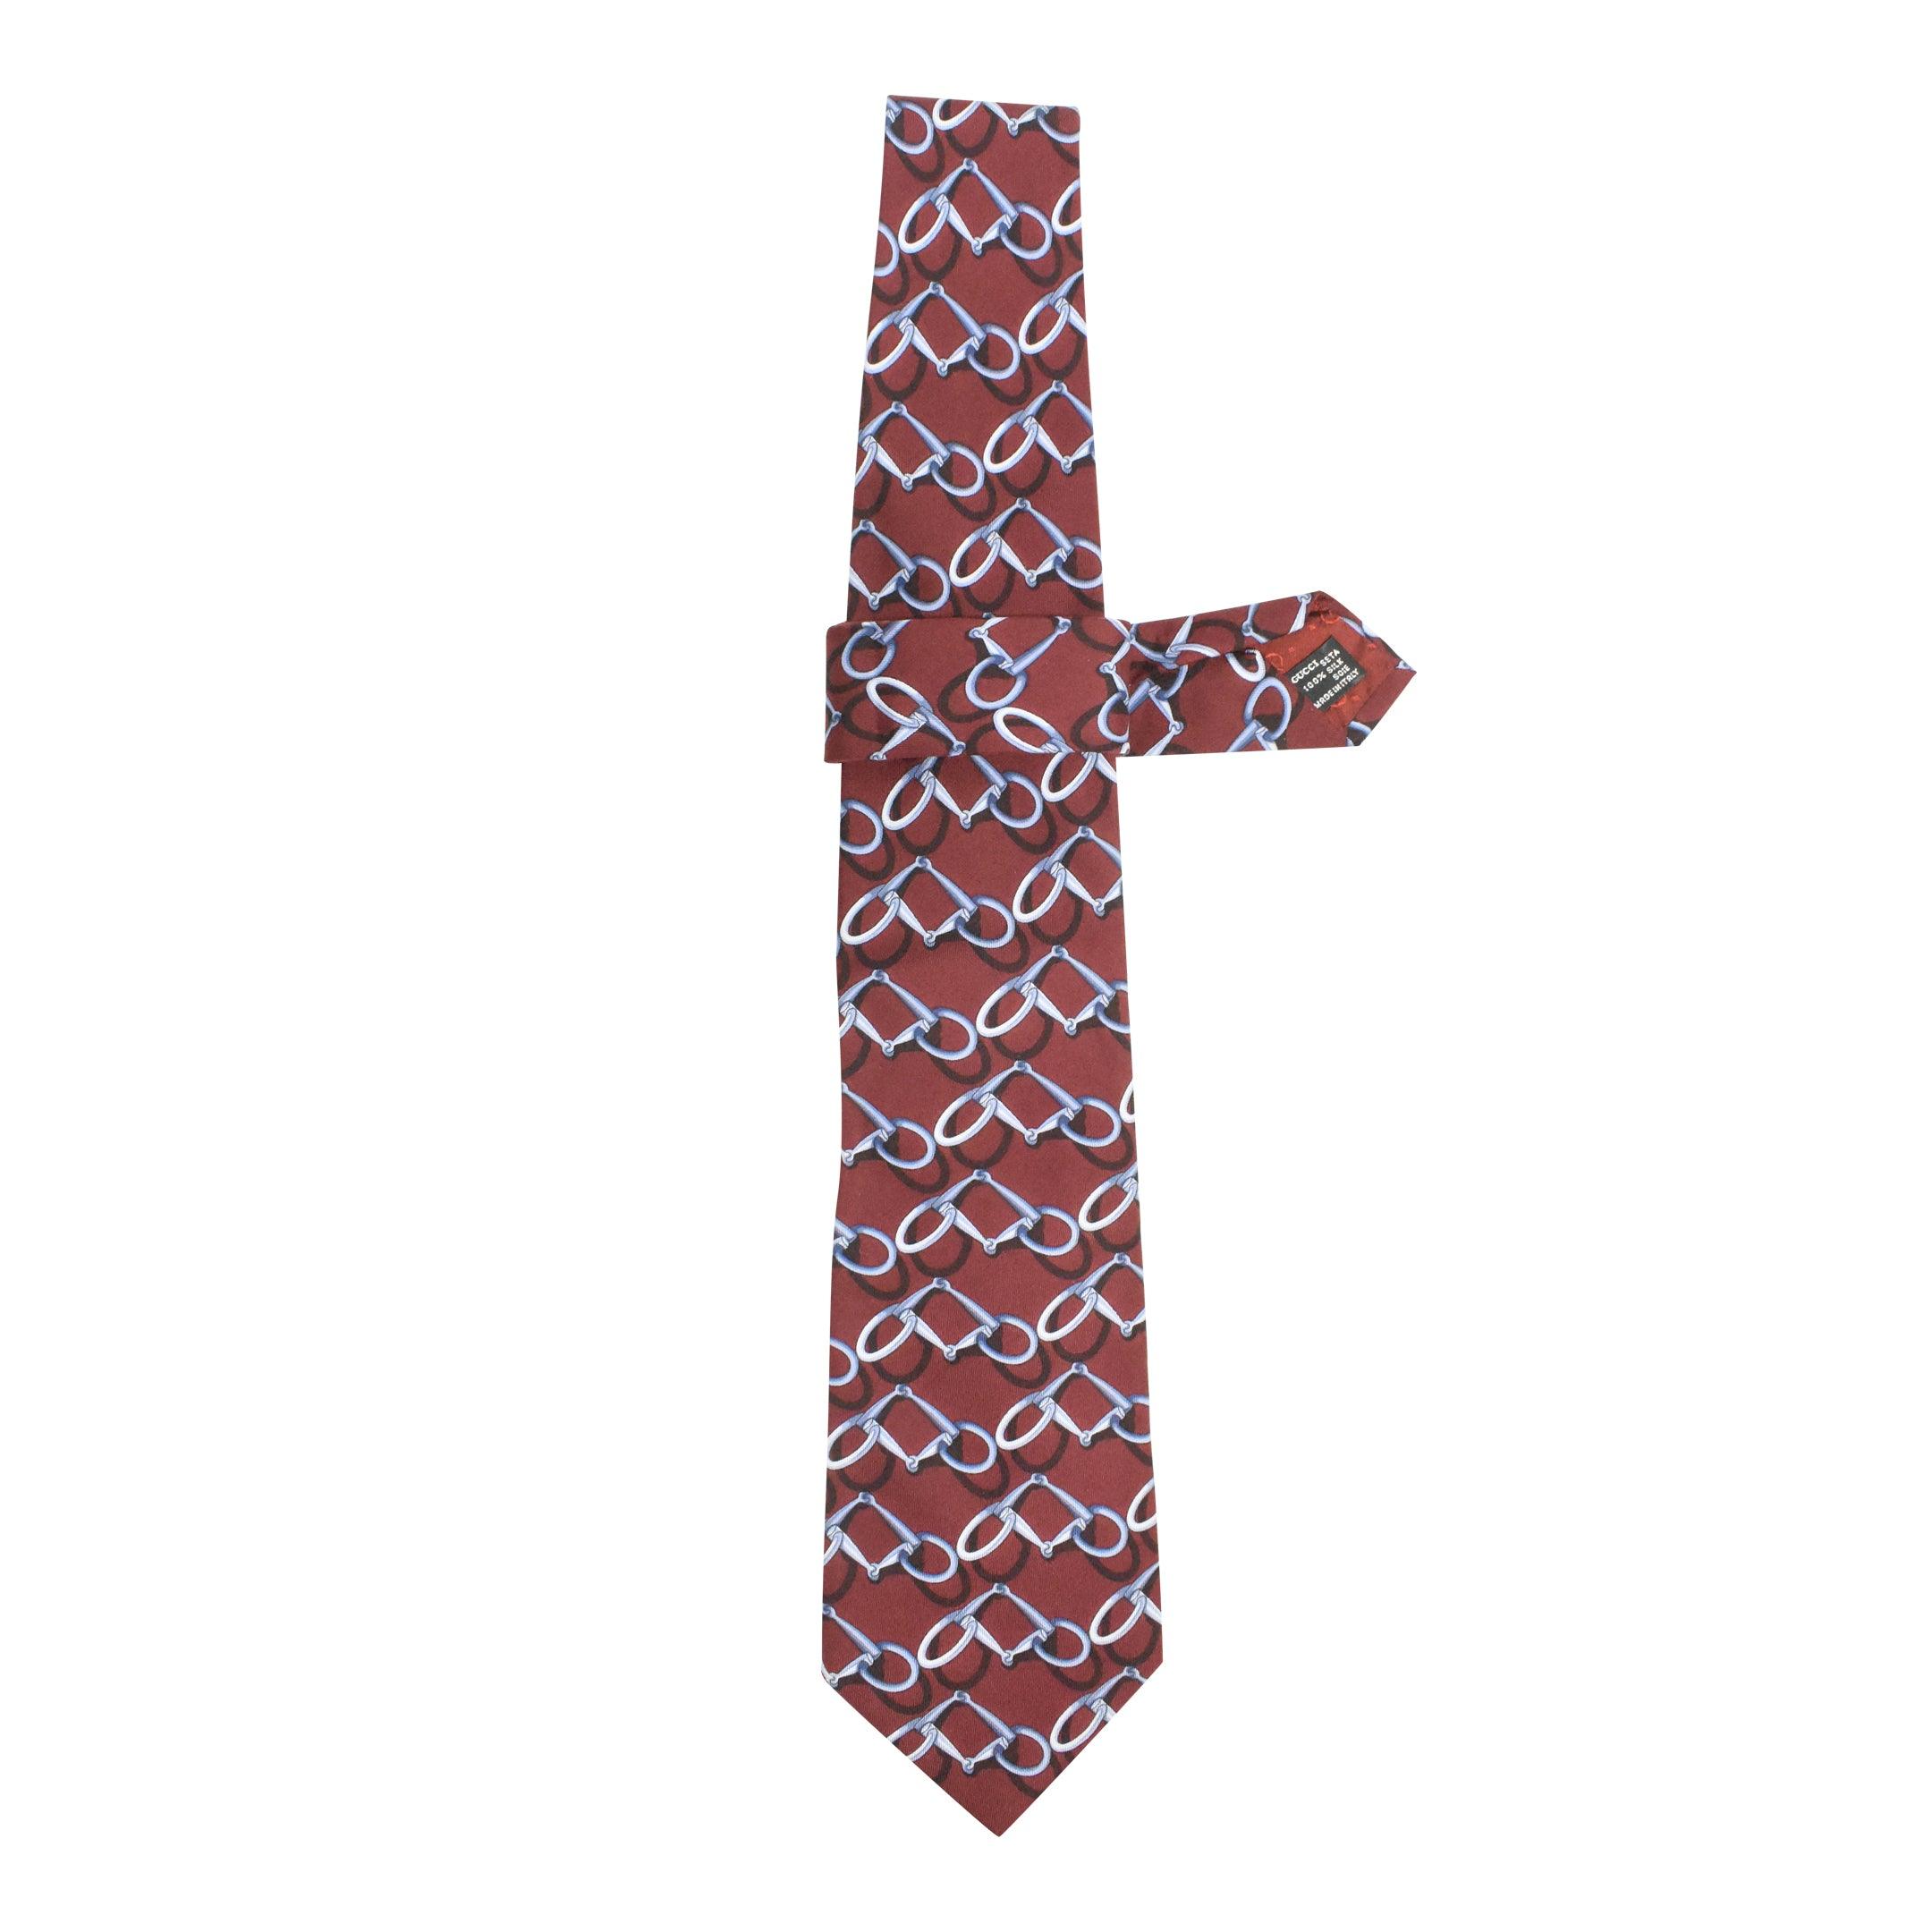 Gucci Tie - Fashionably Yours